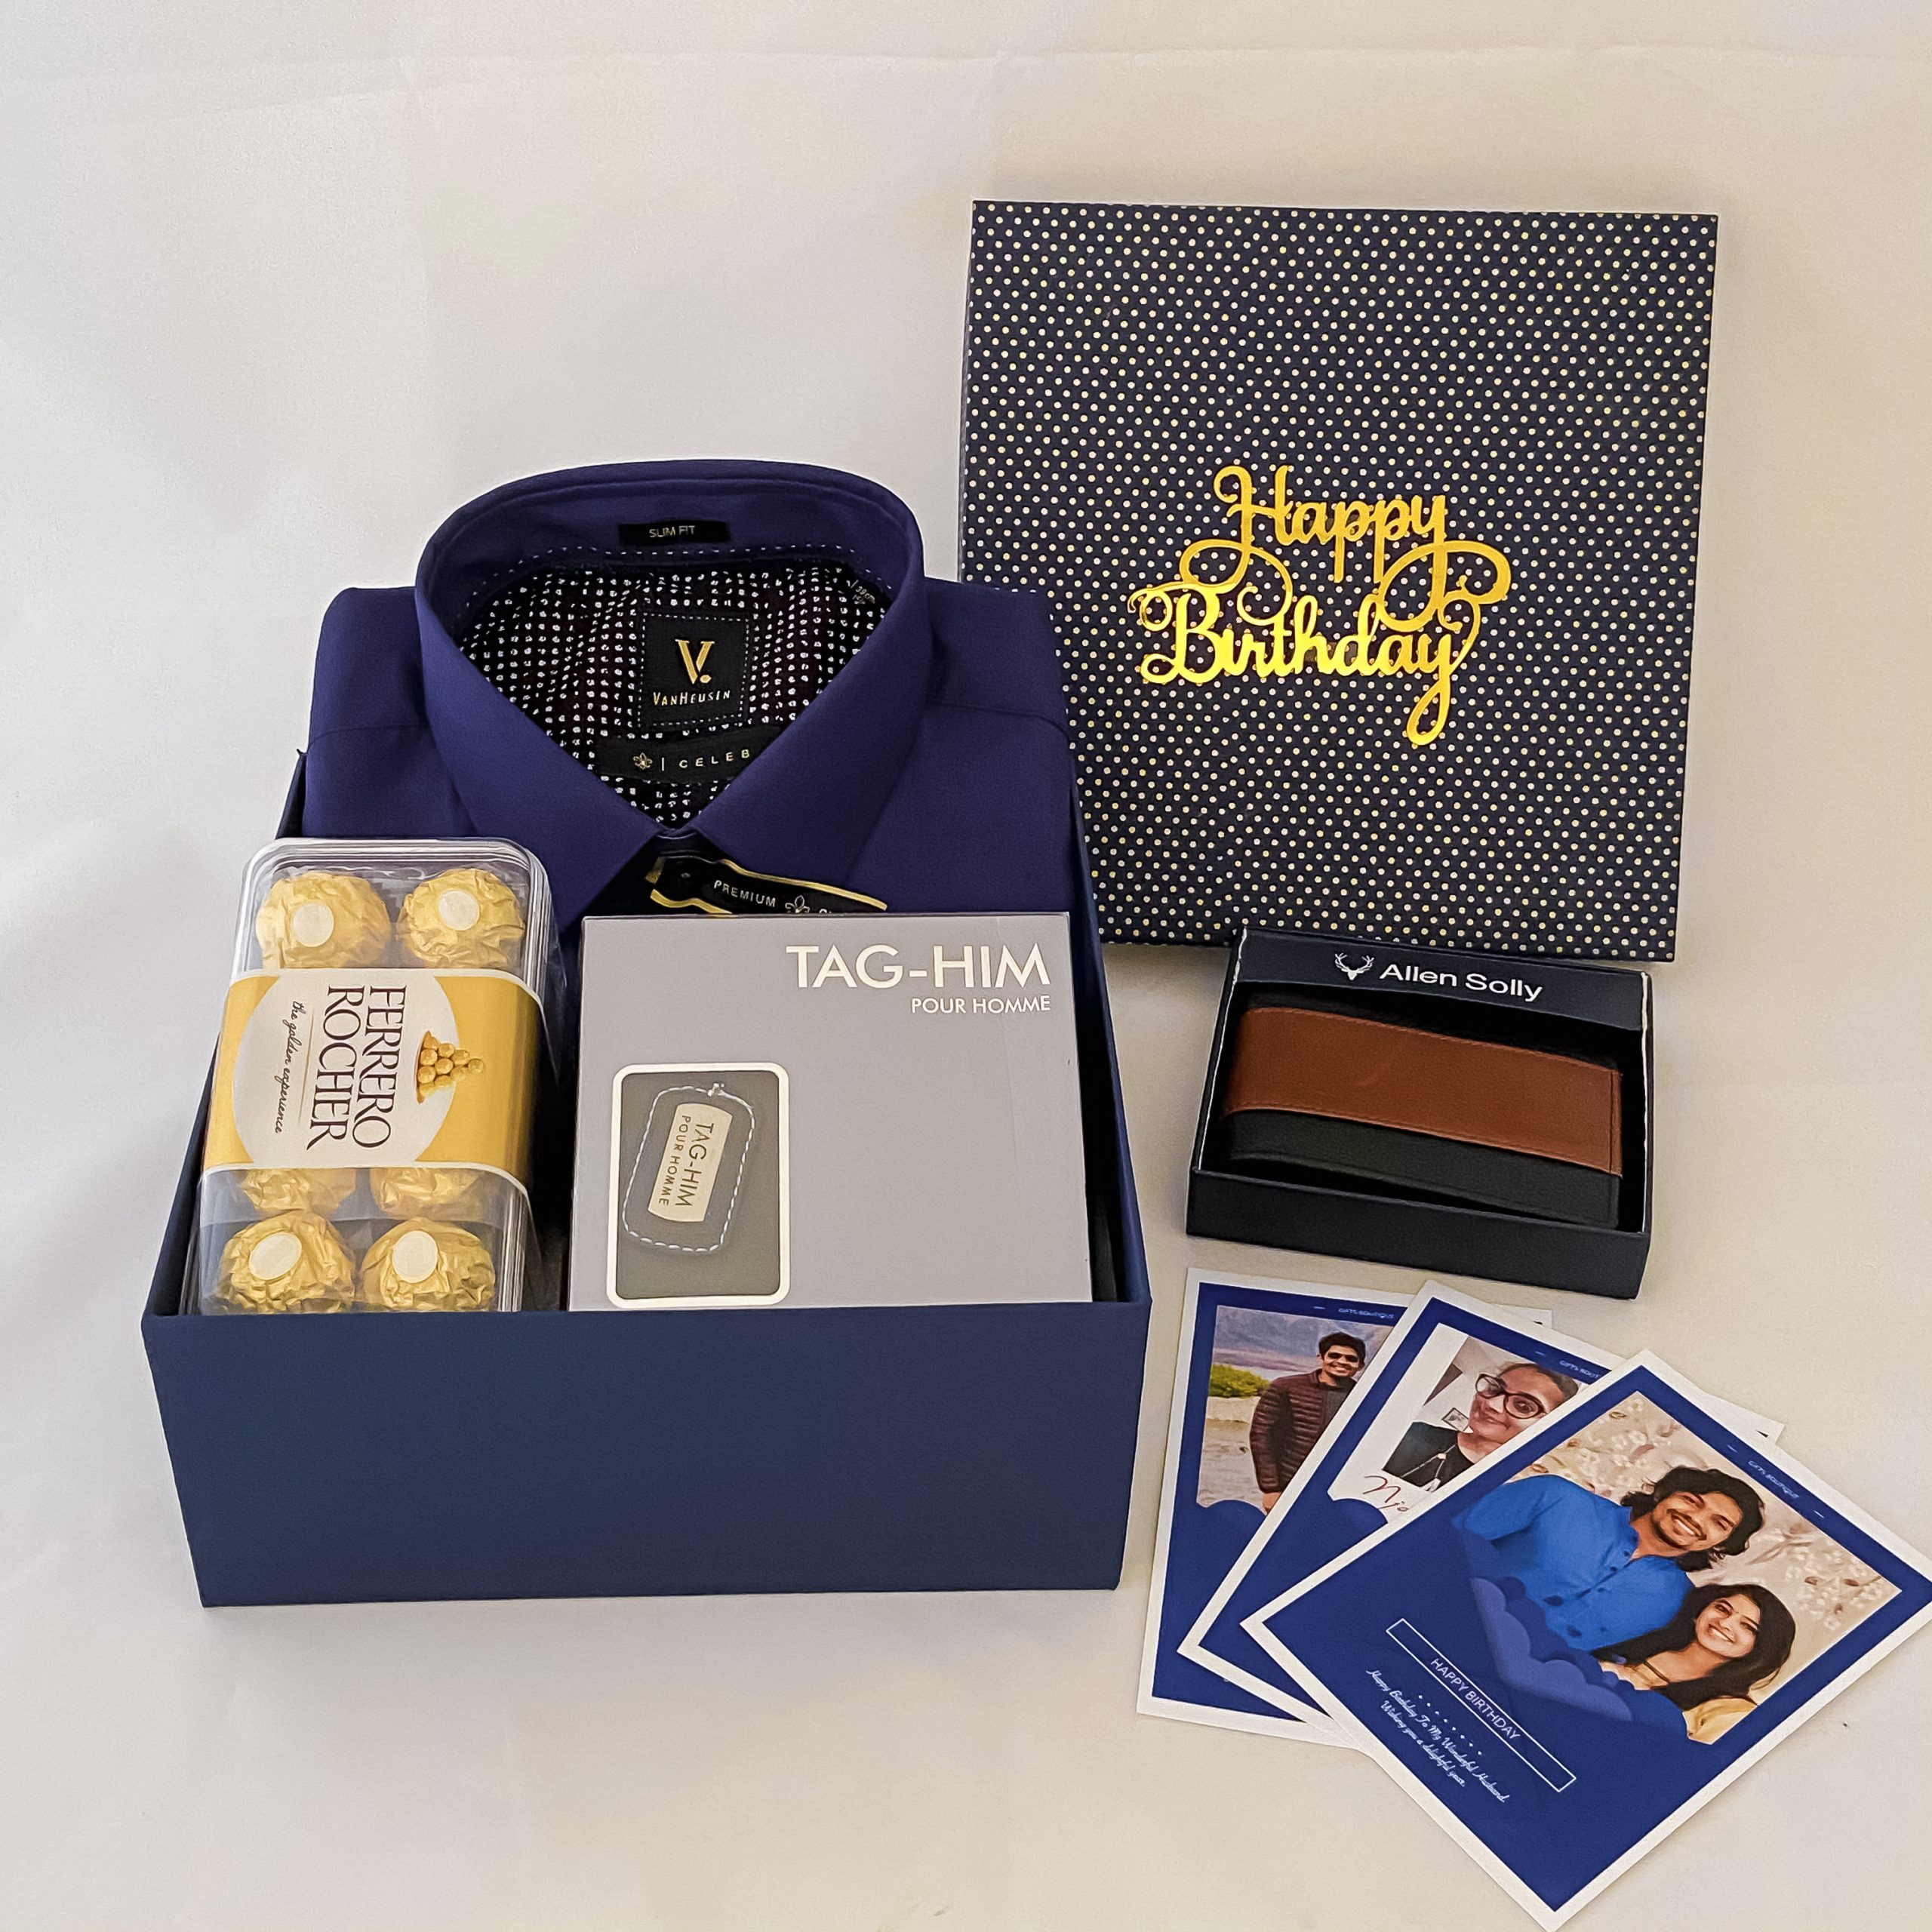 Experience more than 158 top birthday gifts for men